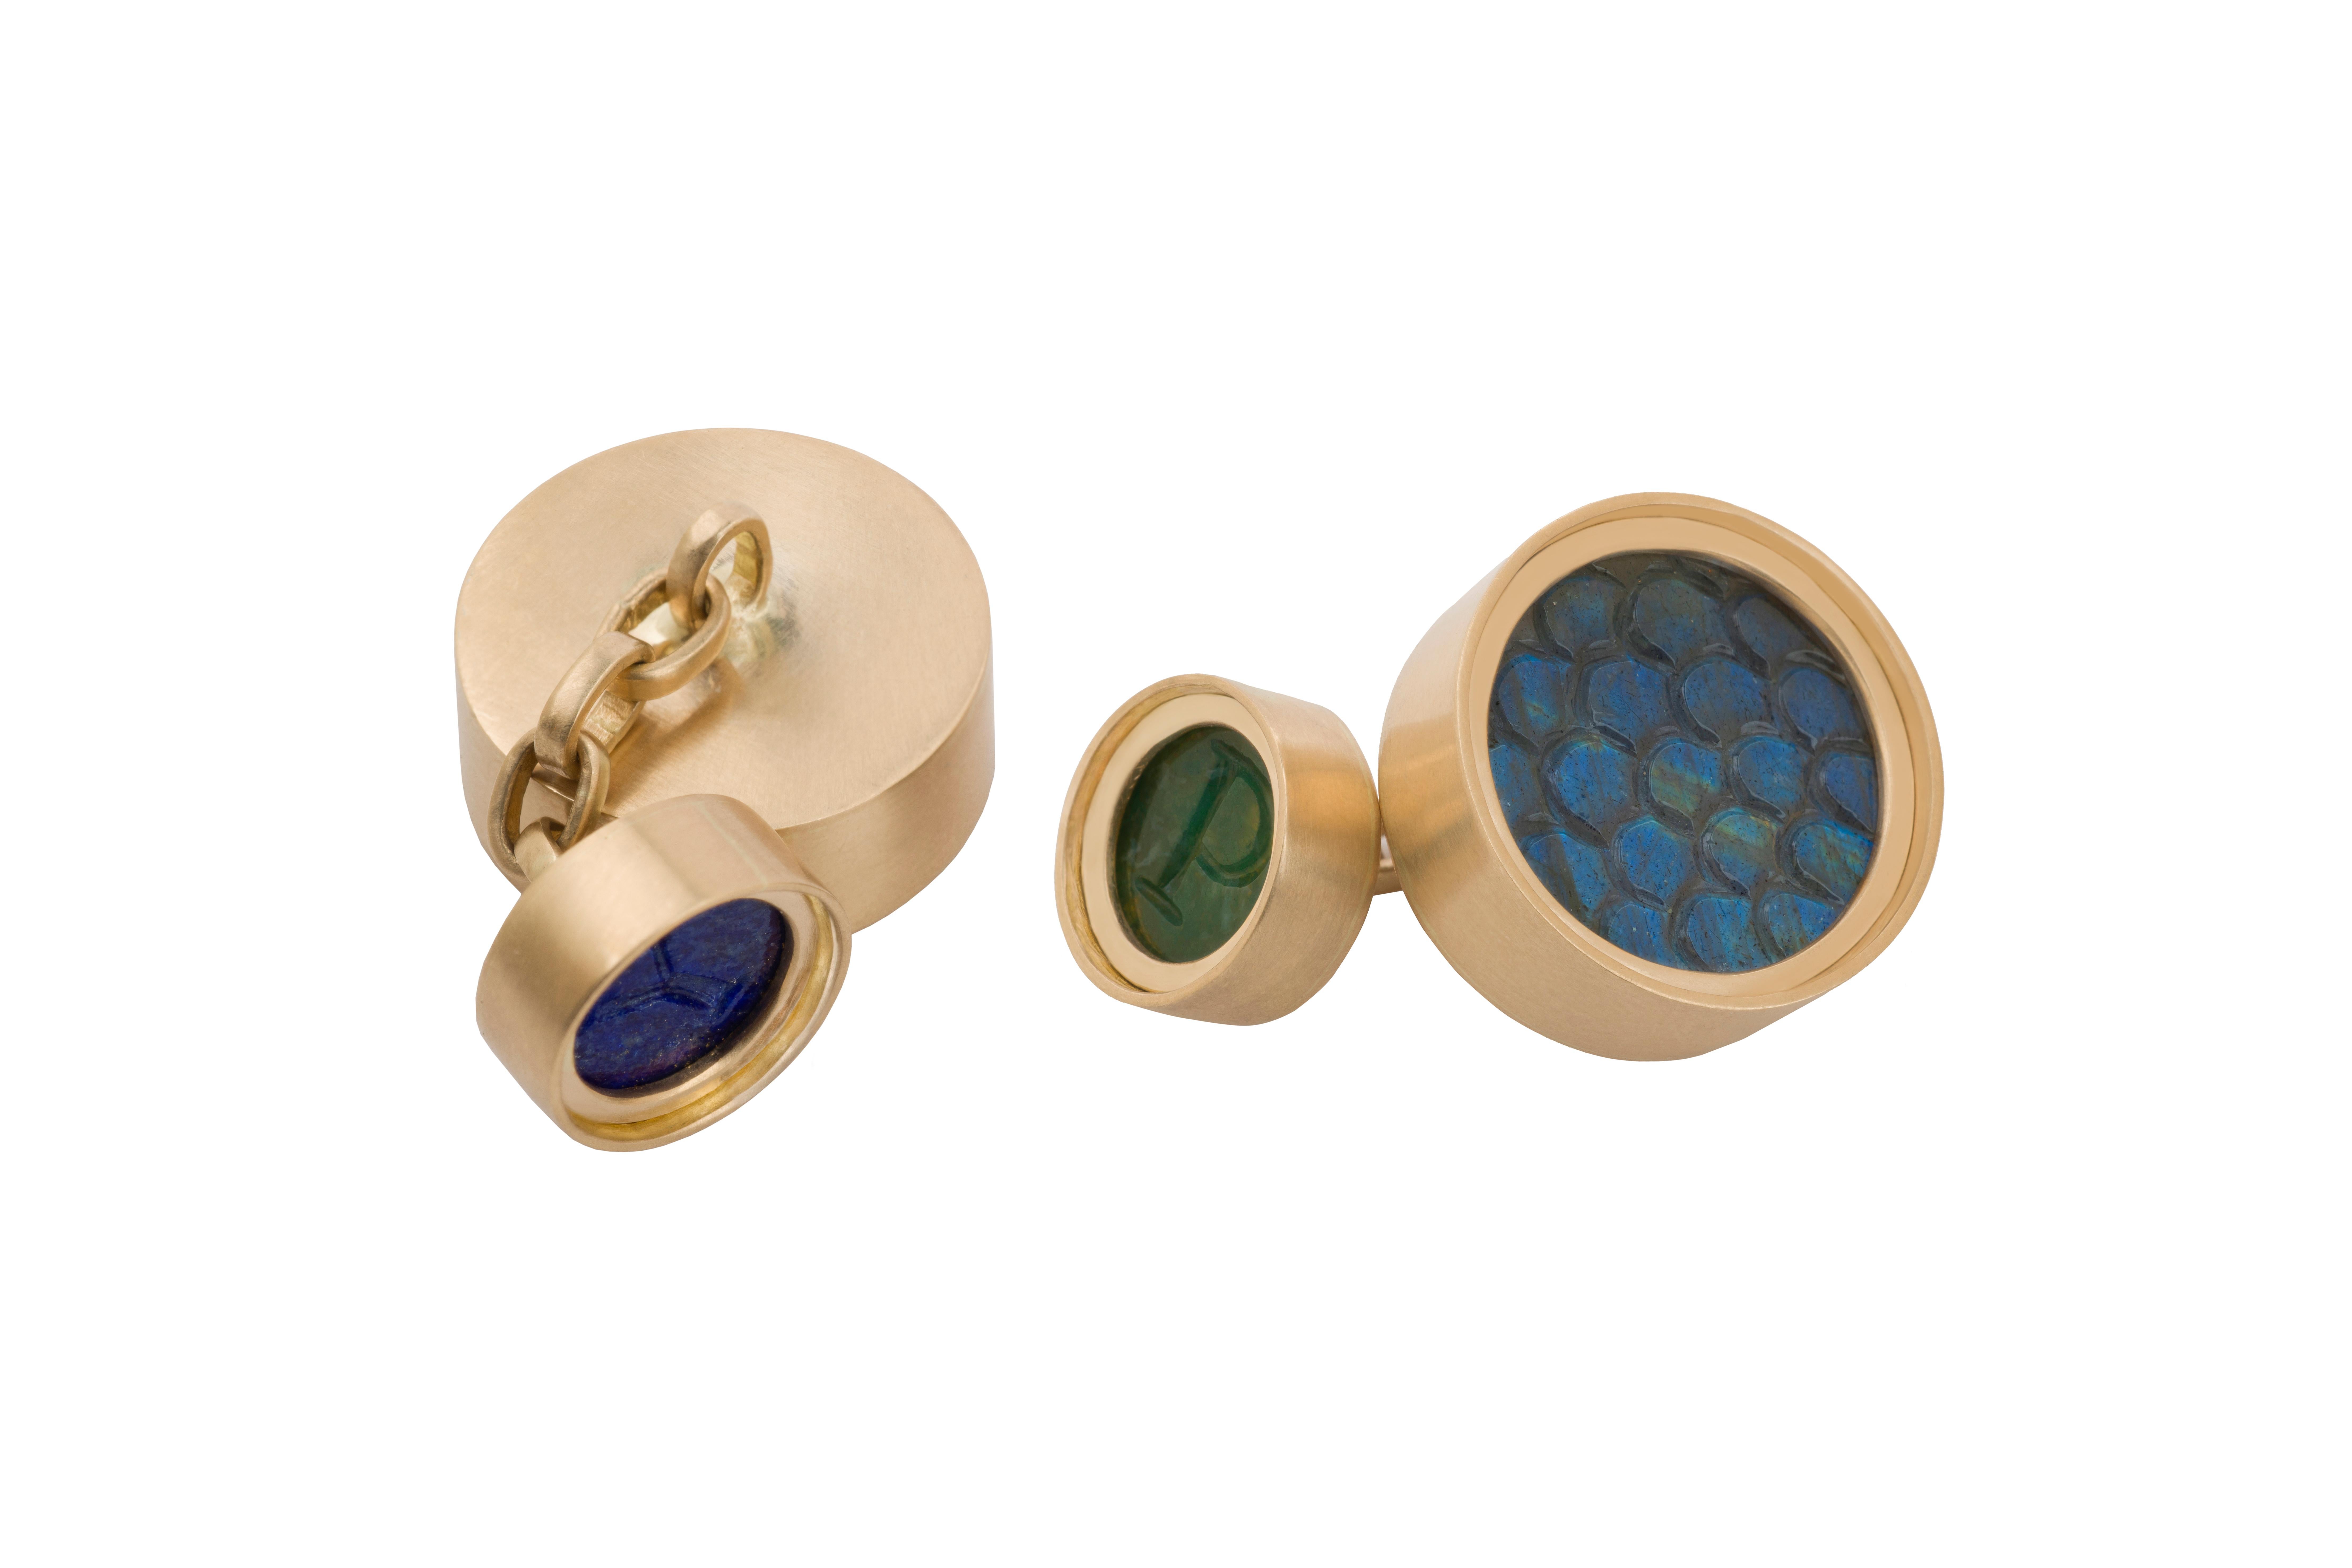 OUROBOROS snakeskin carved rainbow moonstone, blue labradorite, moss agate and lapis lazuli cufflinks set in 18kt gold.

OUROBOROS’ commitment to using only the most unique stones set in 18 or 24 Karat gold, is matched only to Olivia’s commitment to